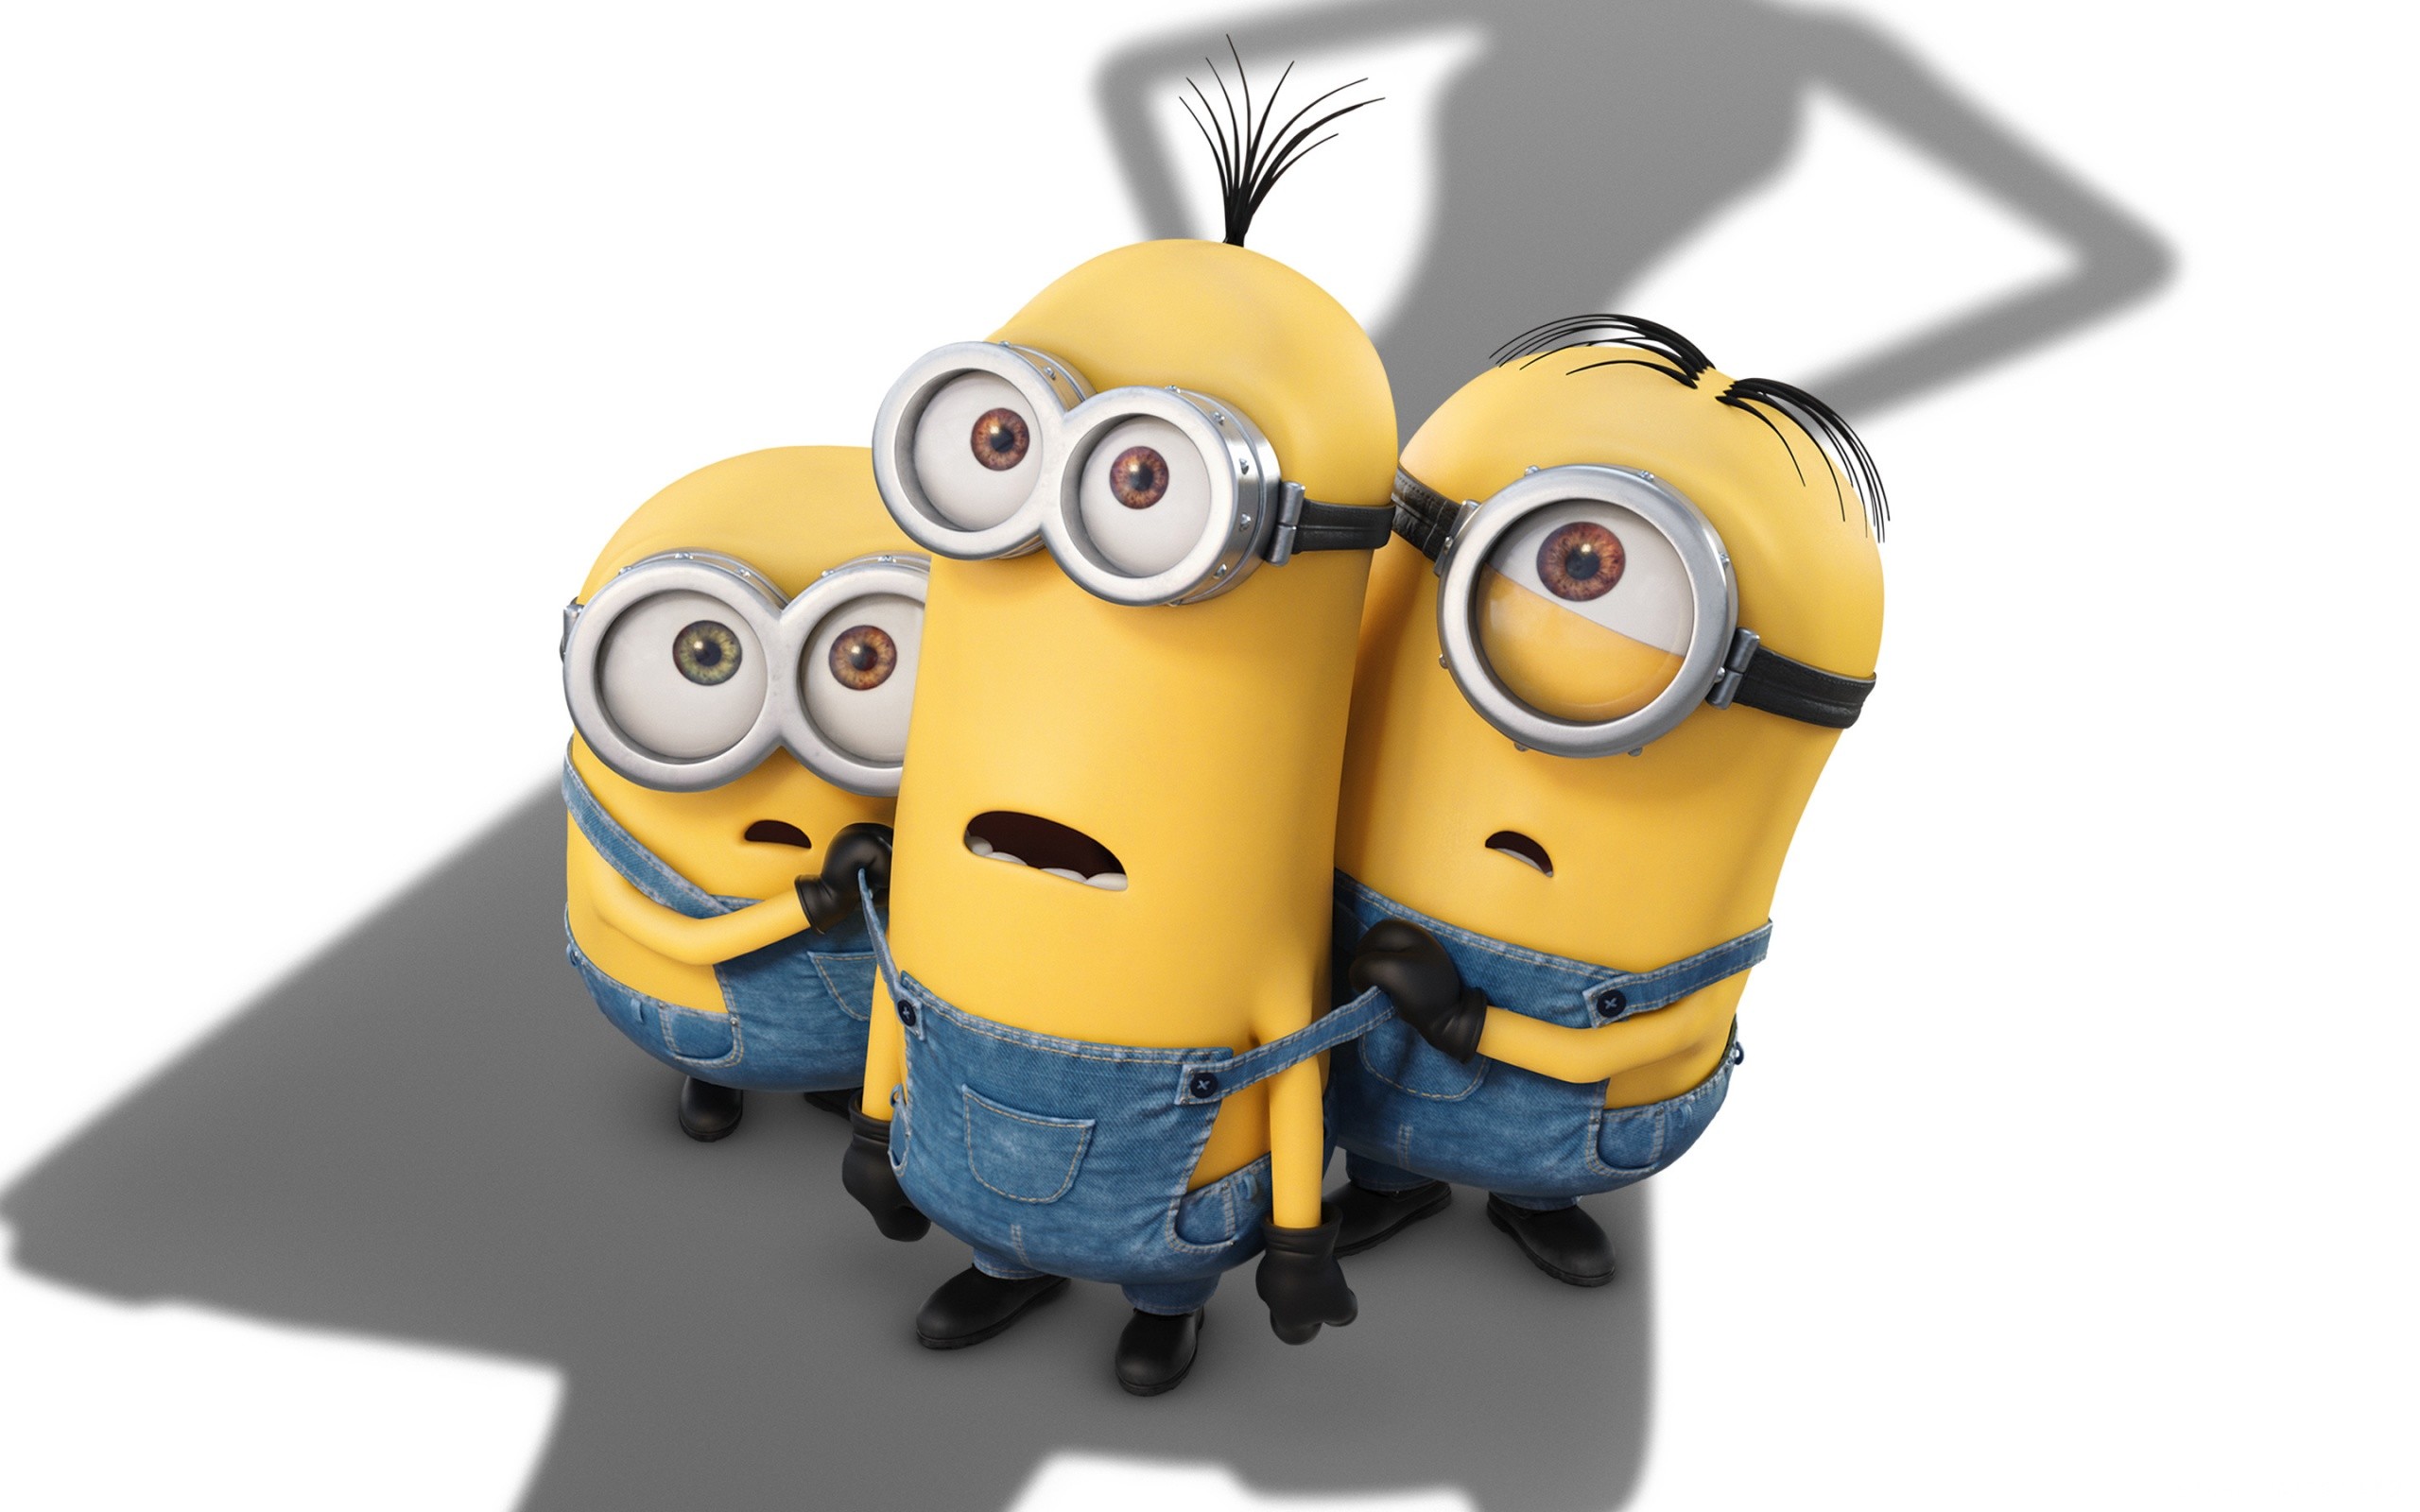 2560x1600 Bob and Kevin Minions in 2015 Best Animated Film Minions wallpaper .